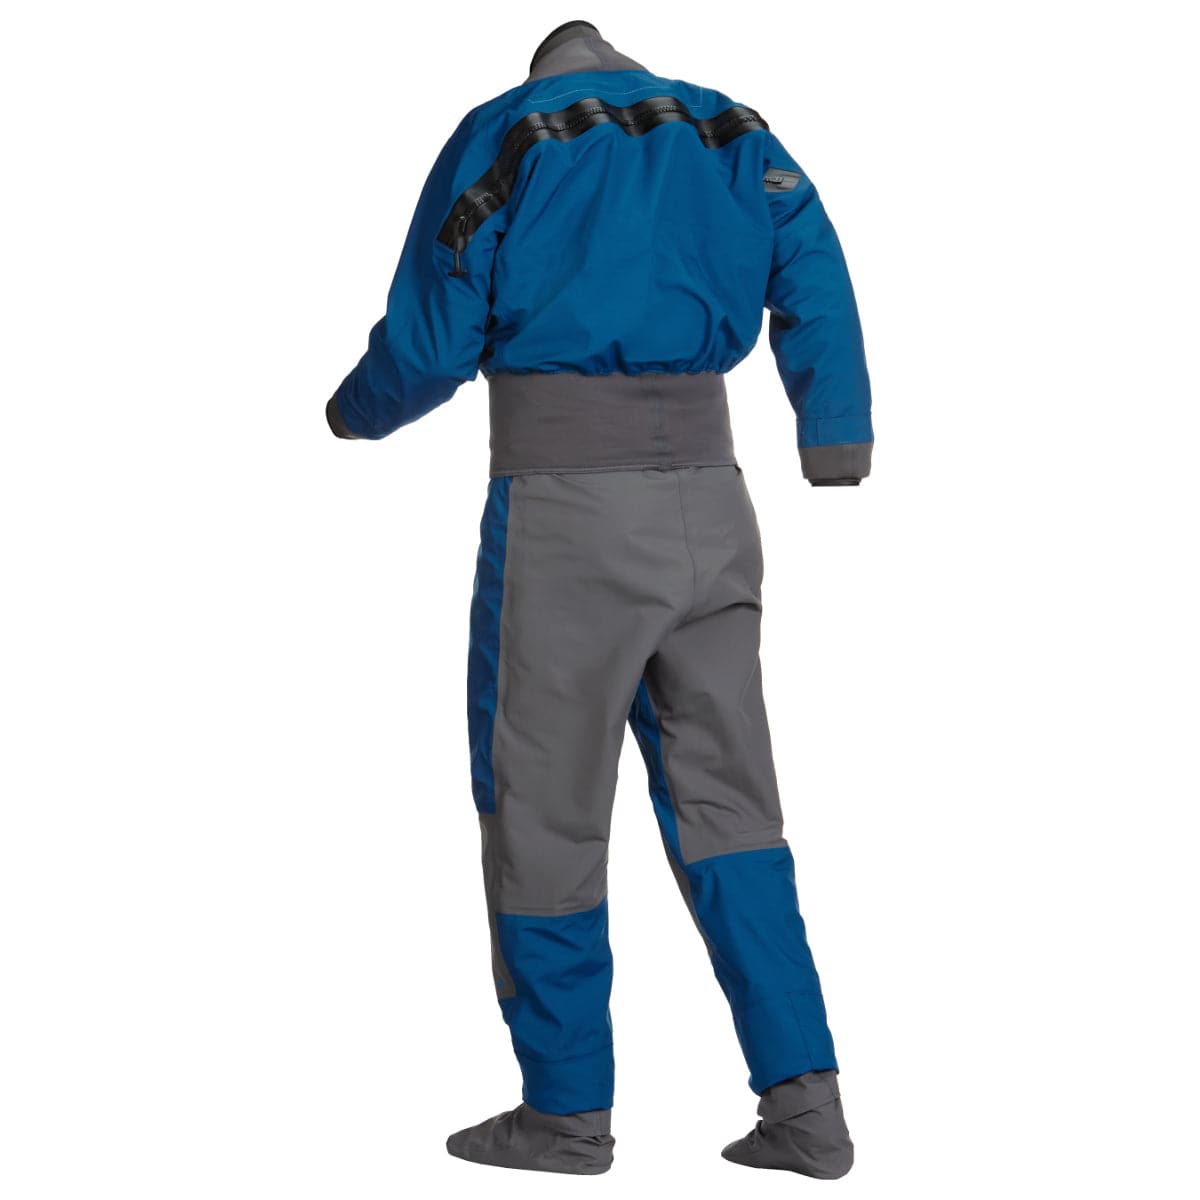 Featuring the 7Figure Drysuit drysuit, drysuits, men's dry wear manufactured by Immersion Research shown here from a fourth angle.